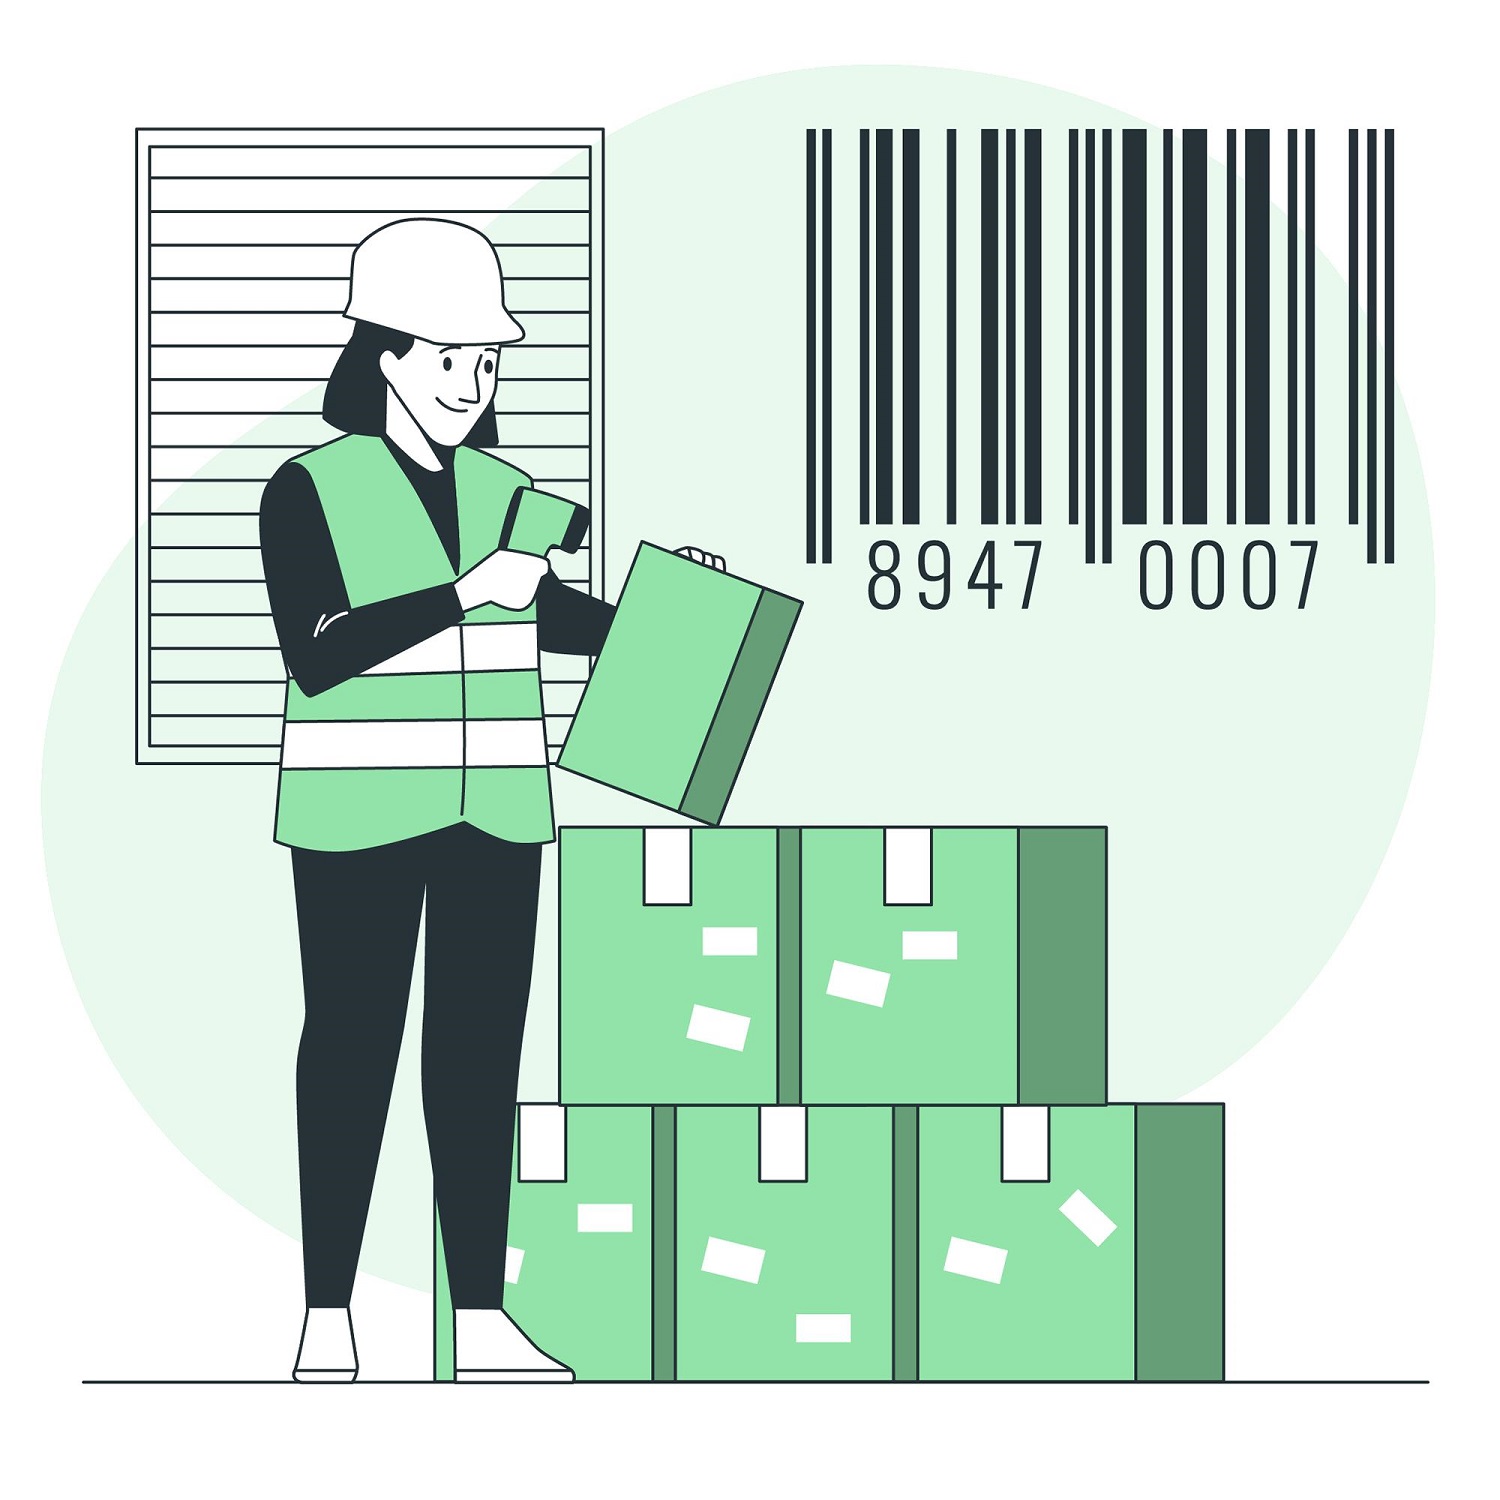 Barcode Inventory System